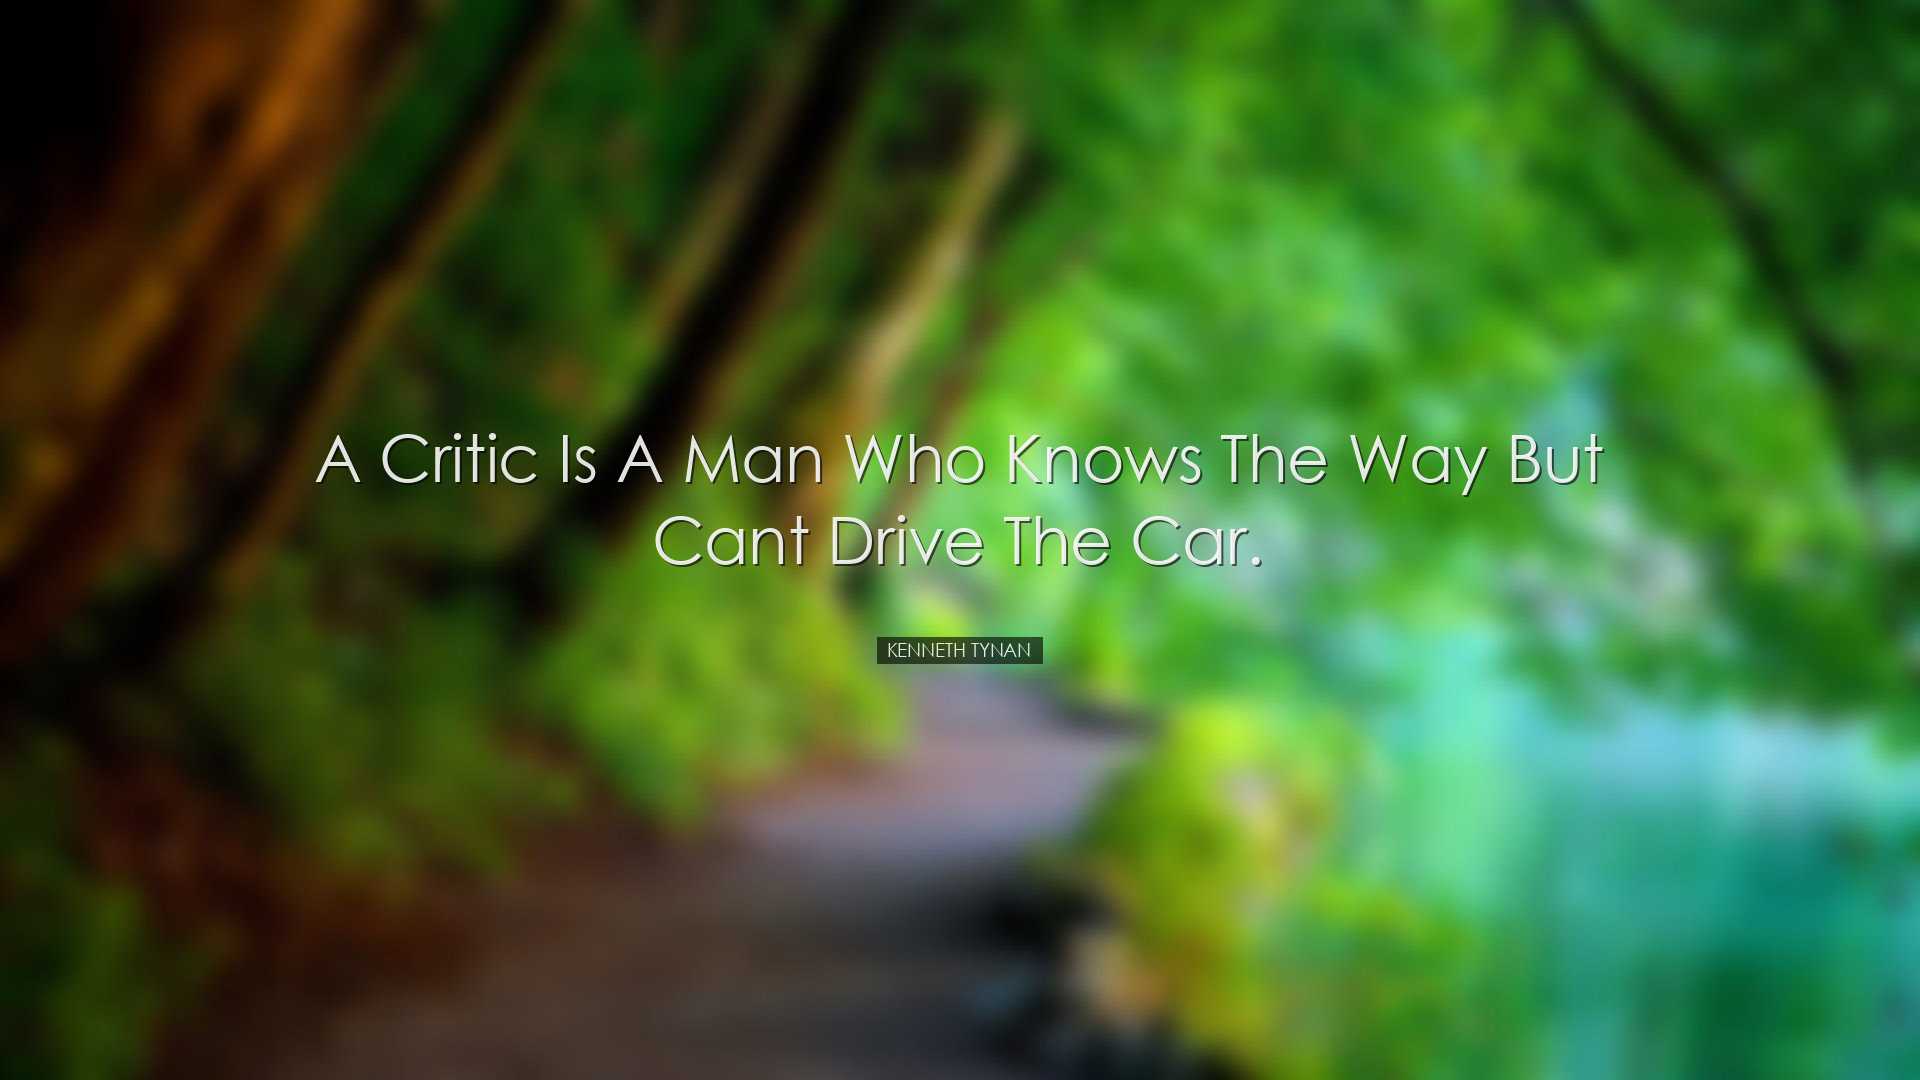 A critic is a man who knows the way but cant drive the car. - Kenn